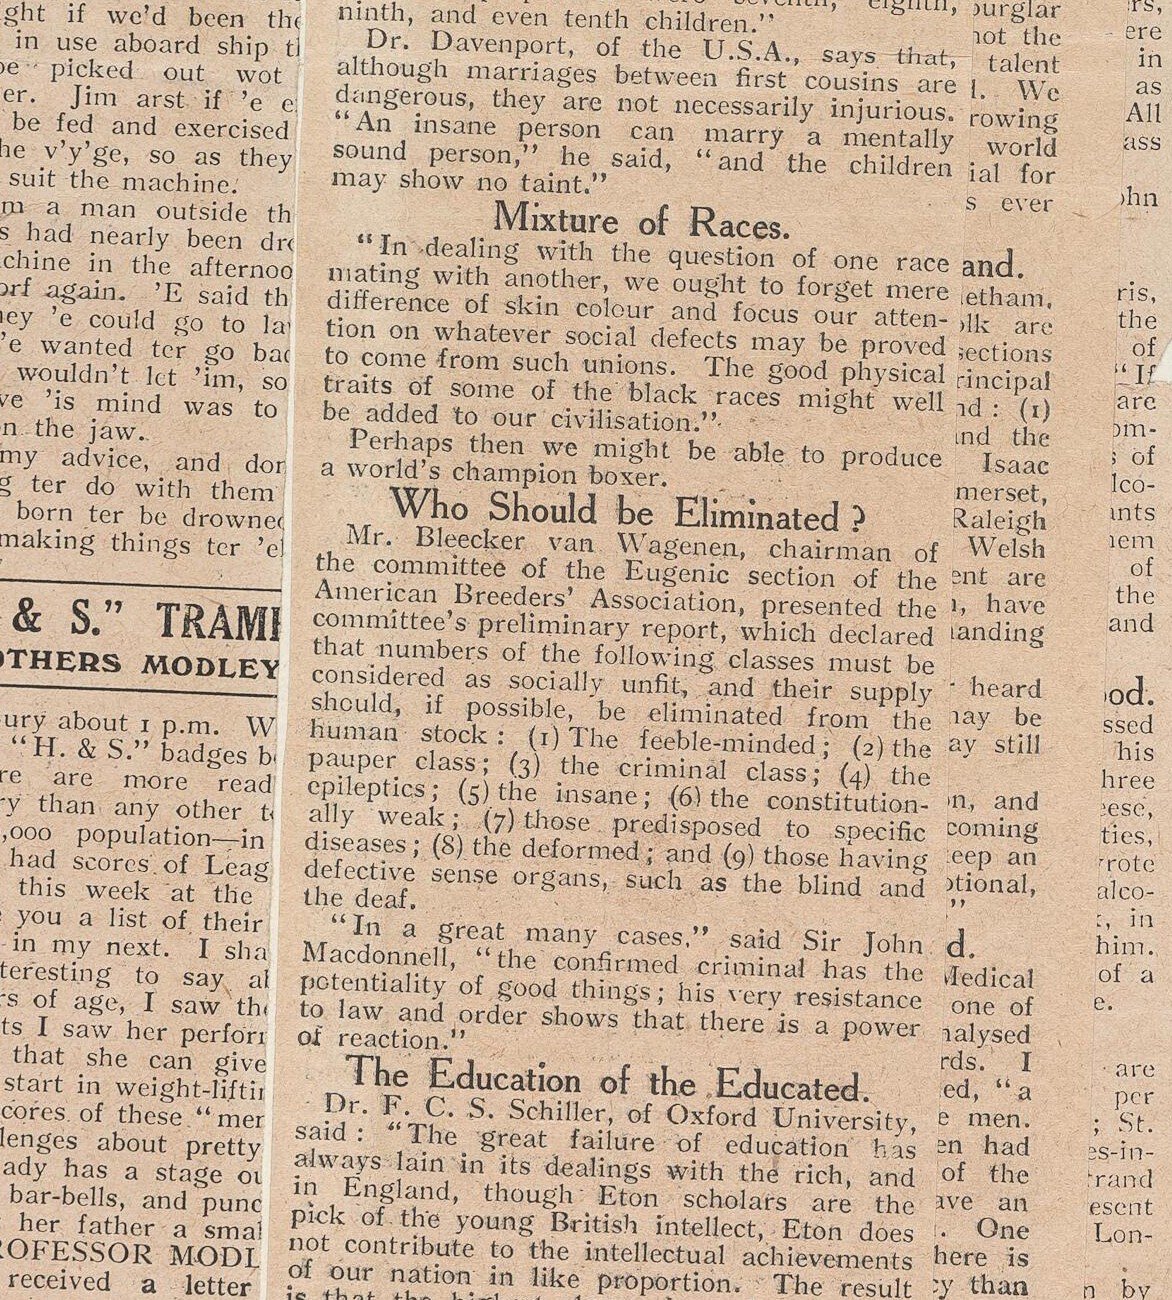 Press cuttings reporting on the First International Eugenics Congress, 1912.